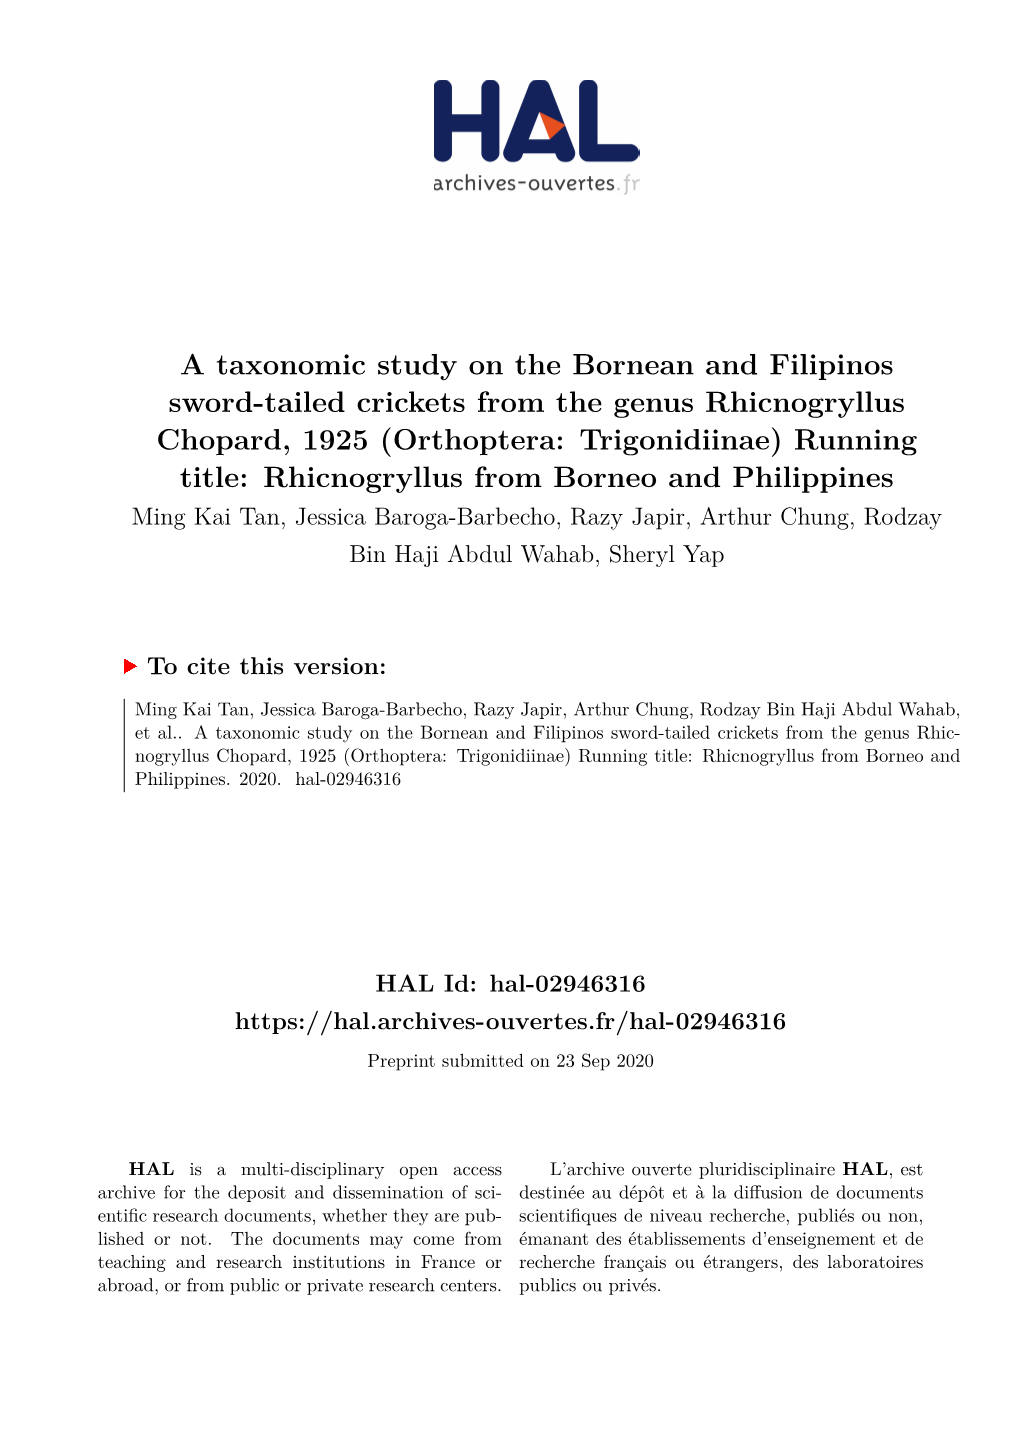 A Taxonomic Study on the Bornean and Filipinos Sword-Tailed Crickets from the Genus Rhicnogryllus Chopard, 1925 (Orthoptera